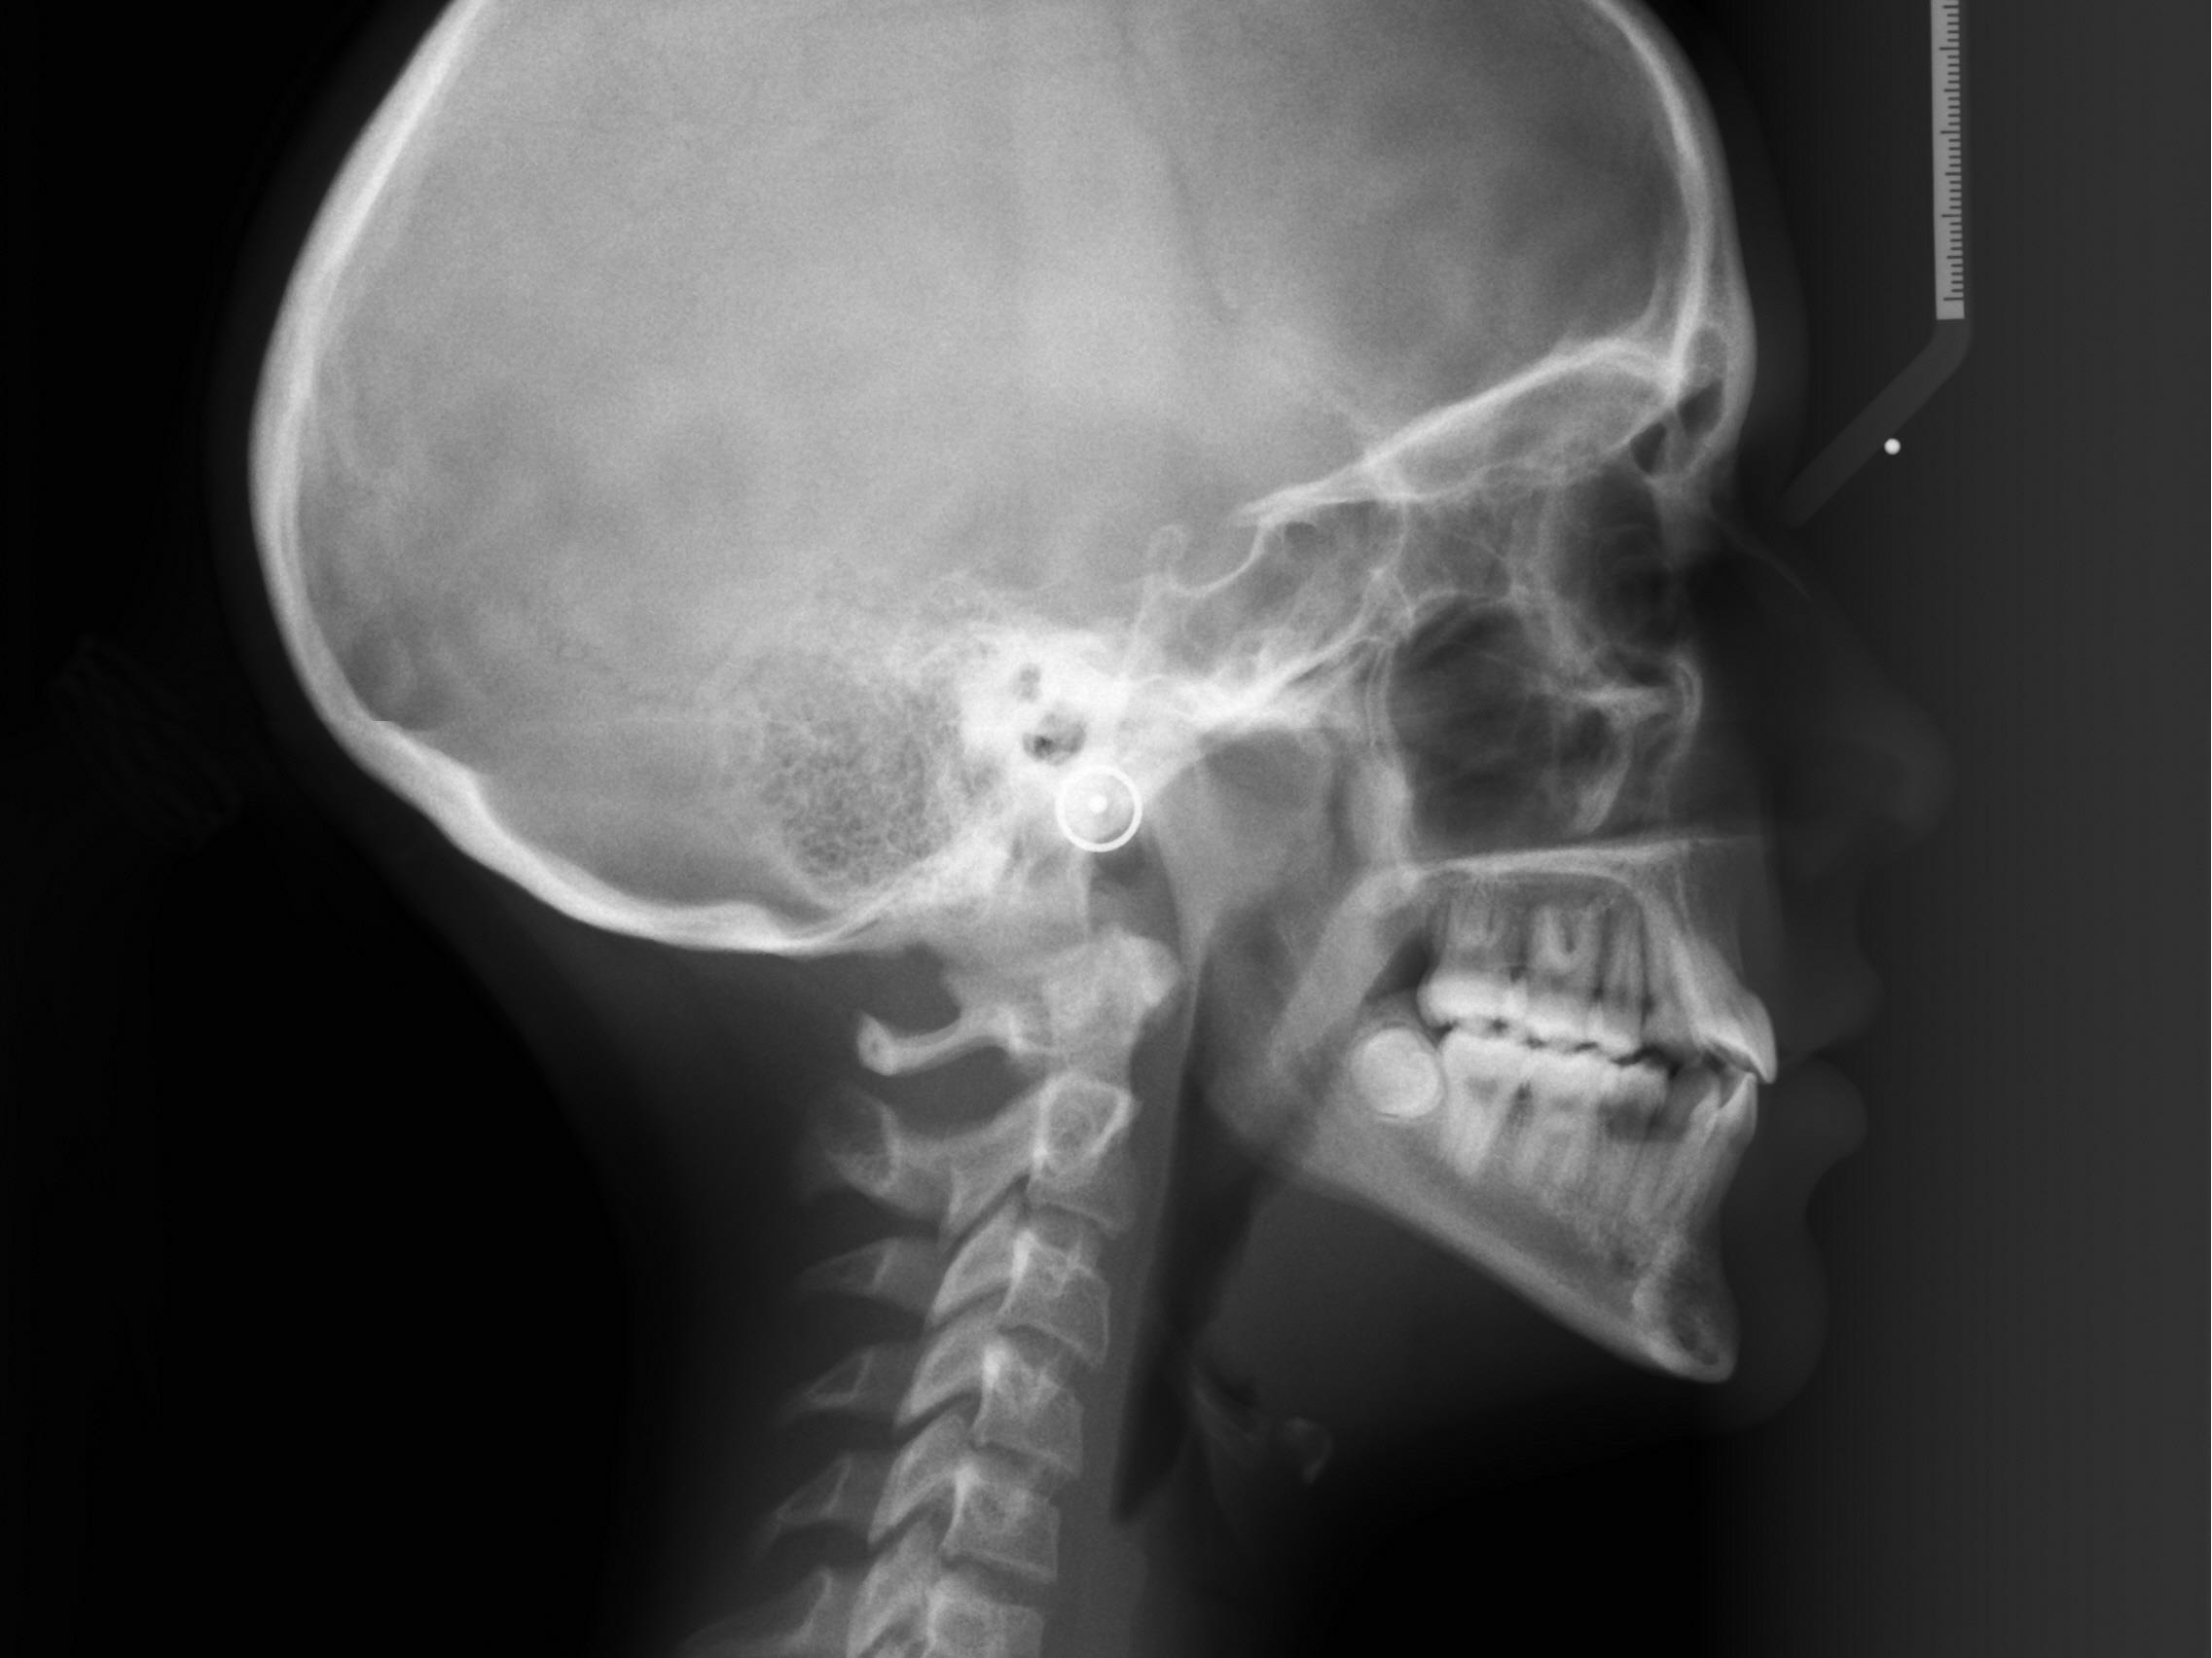 XPVT-D2655 - Jayne Carr - Final - X-ray Lateral.jpg